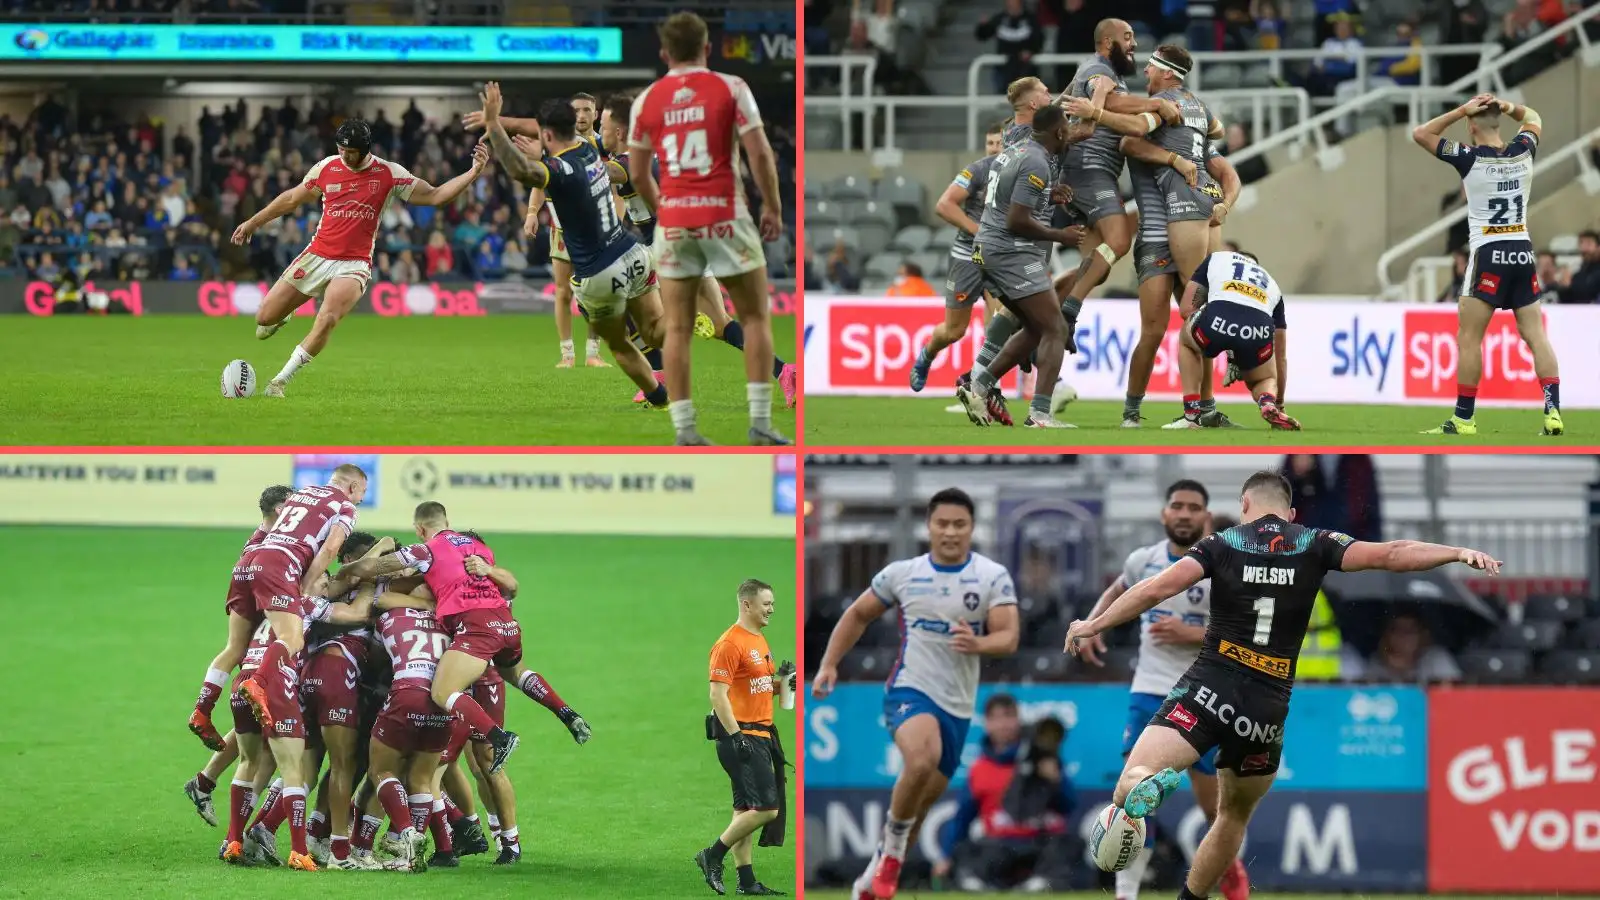 Every Golden Point game in Super League since introduction in 2019